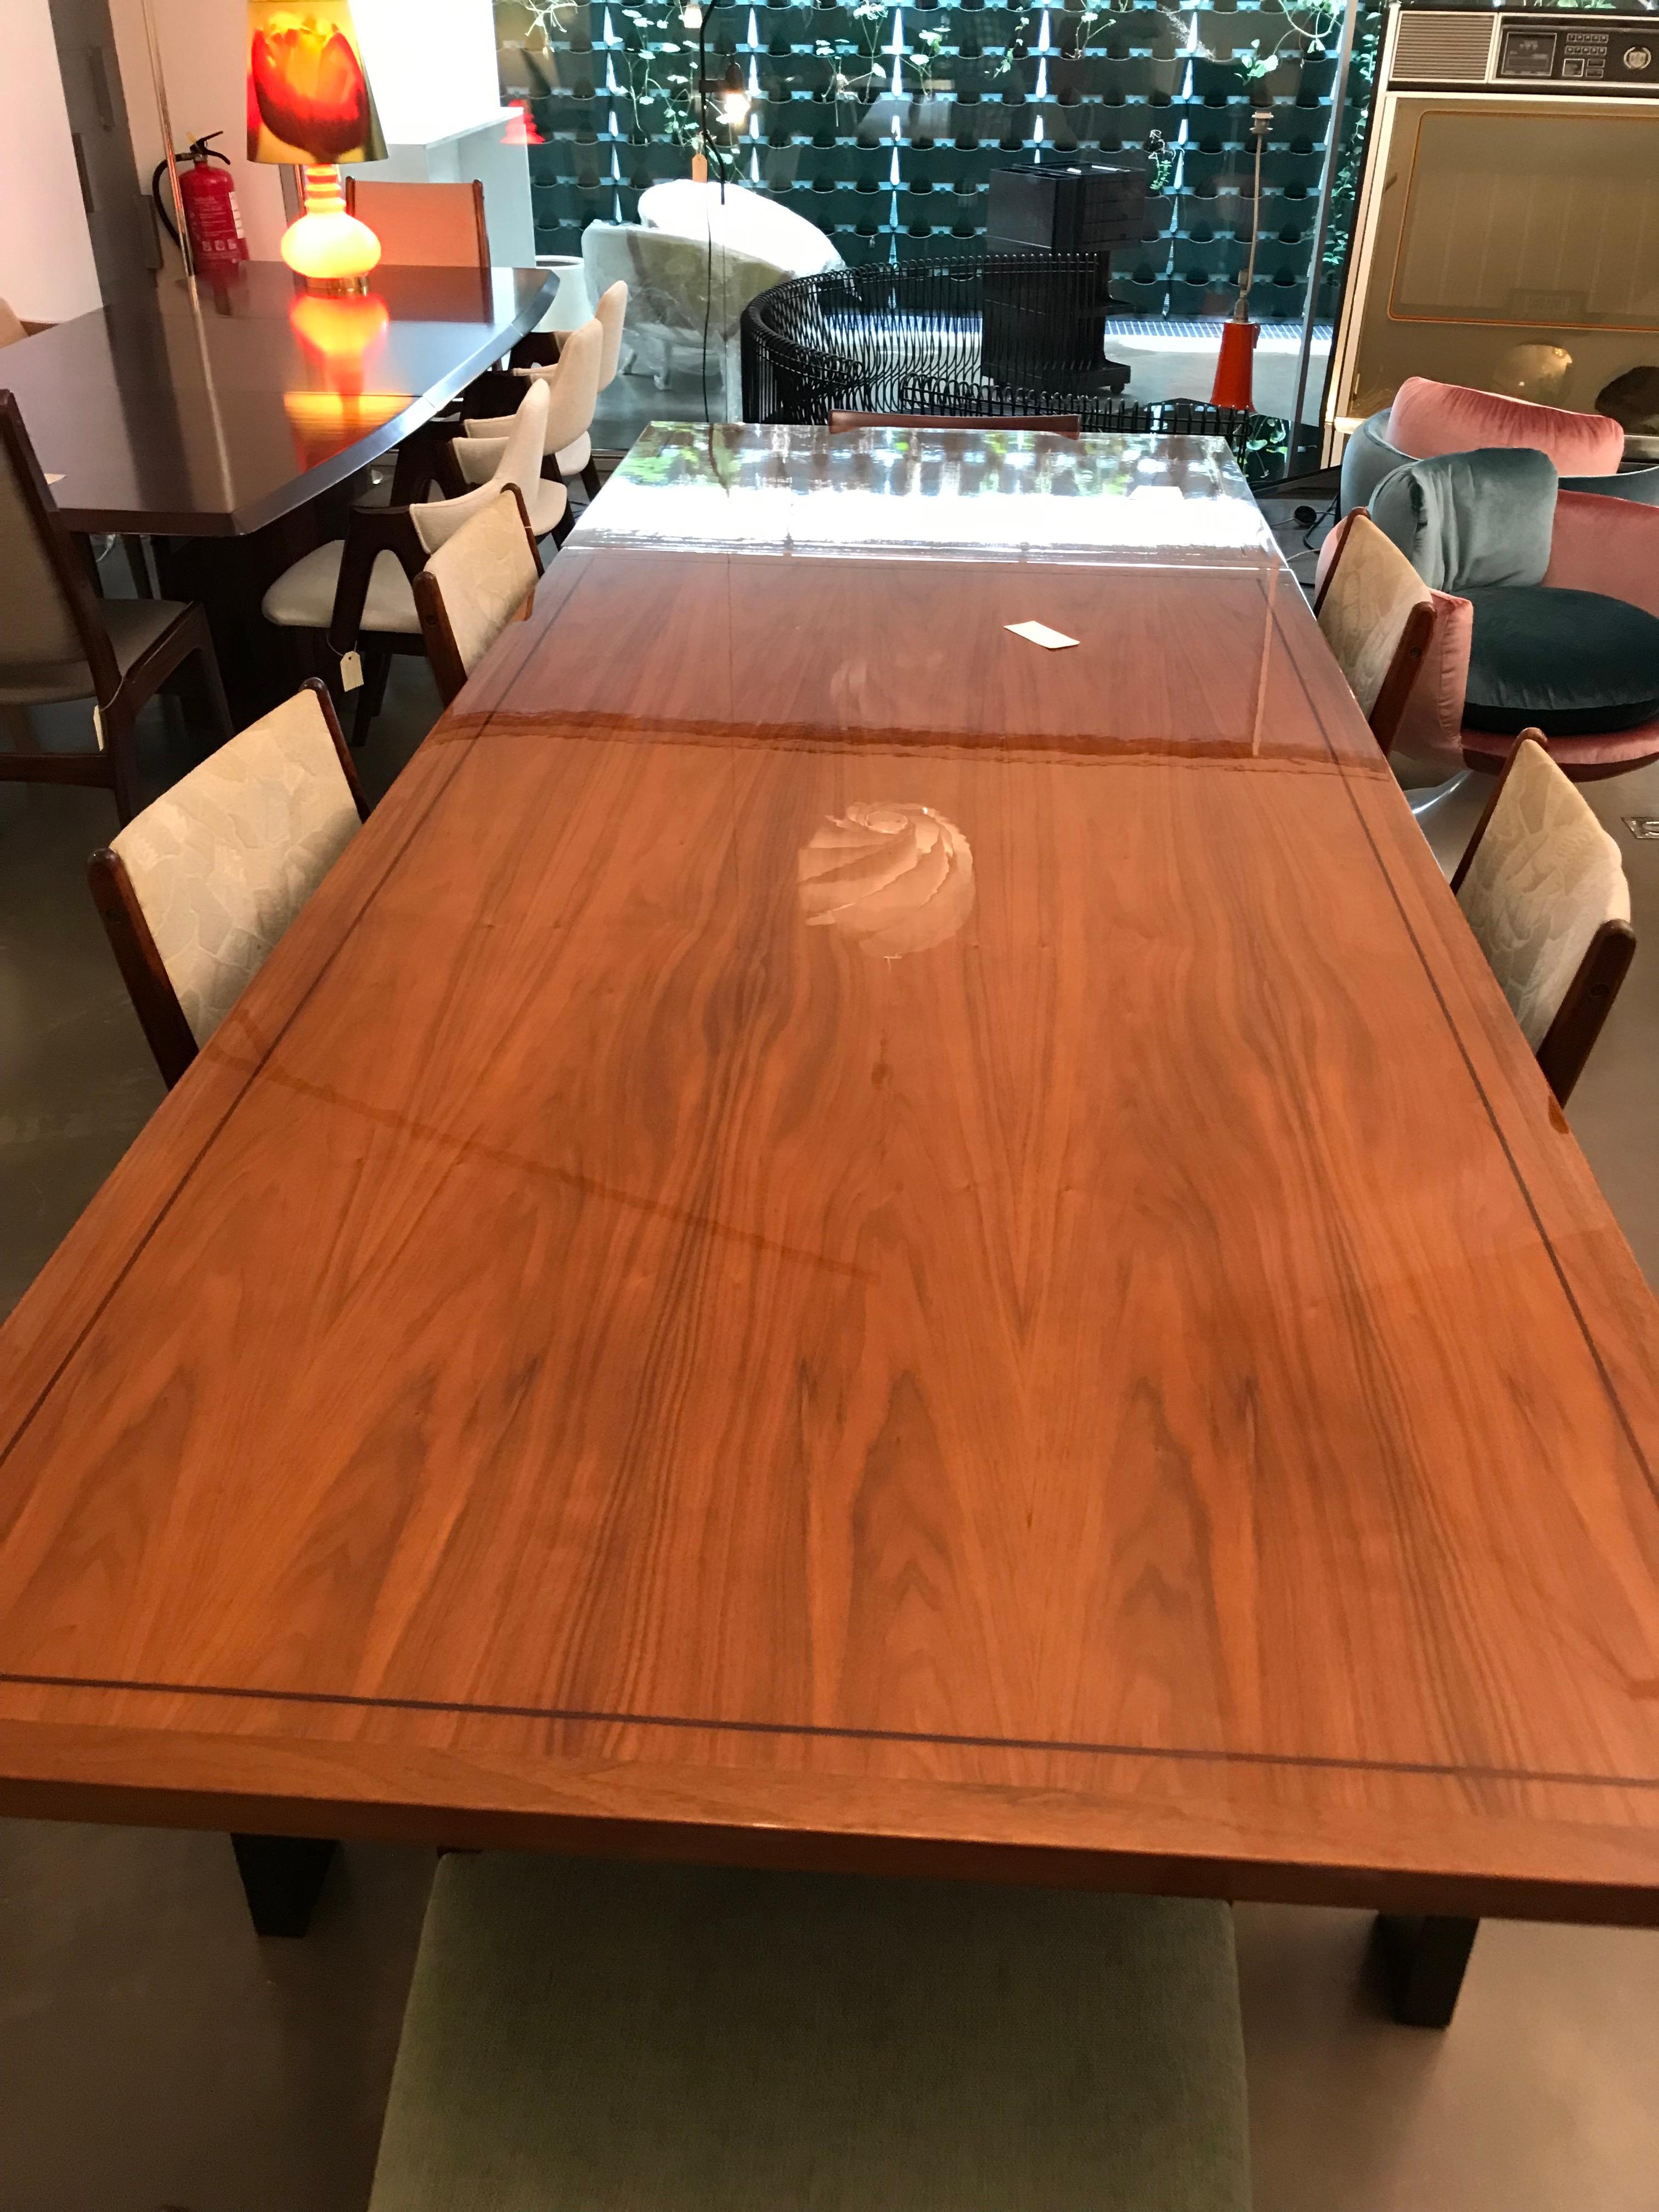 Dining table with walnut root tabletop and black lacquered steel structure
Early 20th century walnut dining table
The four legs black lacquered steel structure contrasts with the walnut top which is a natural lighter toned finish. The top slides